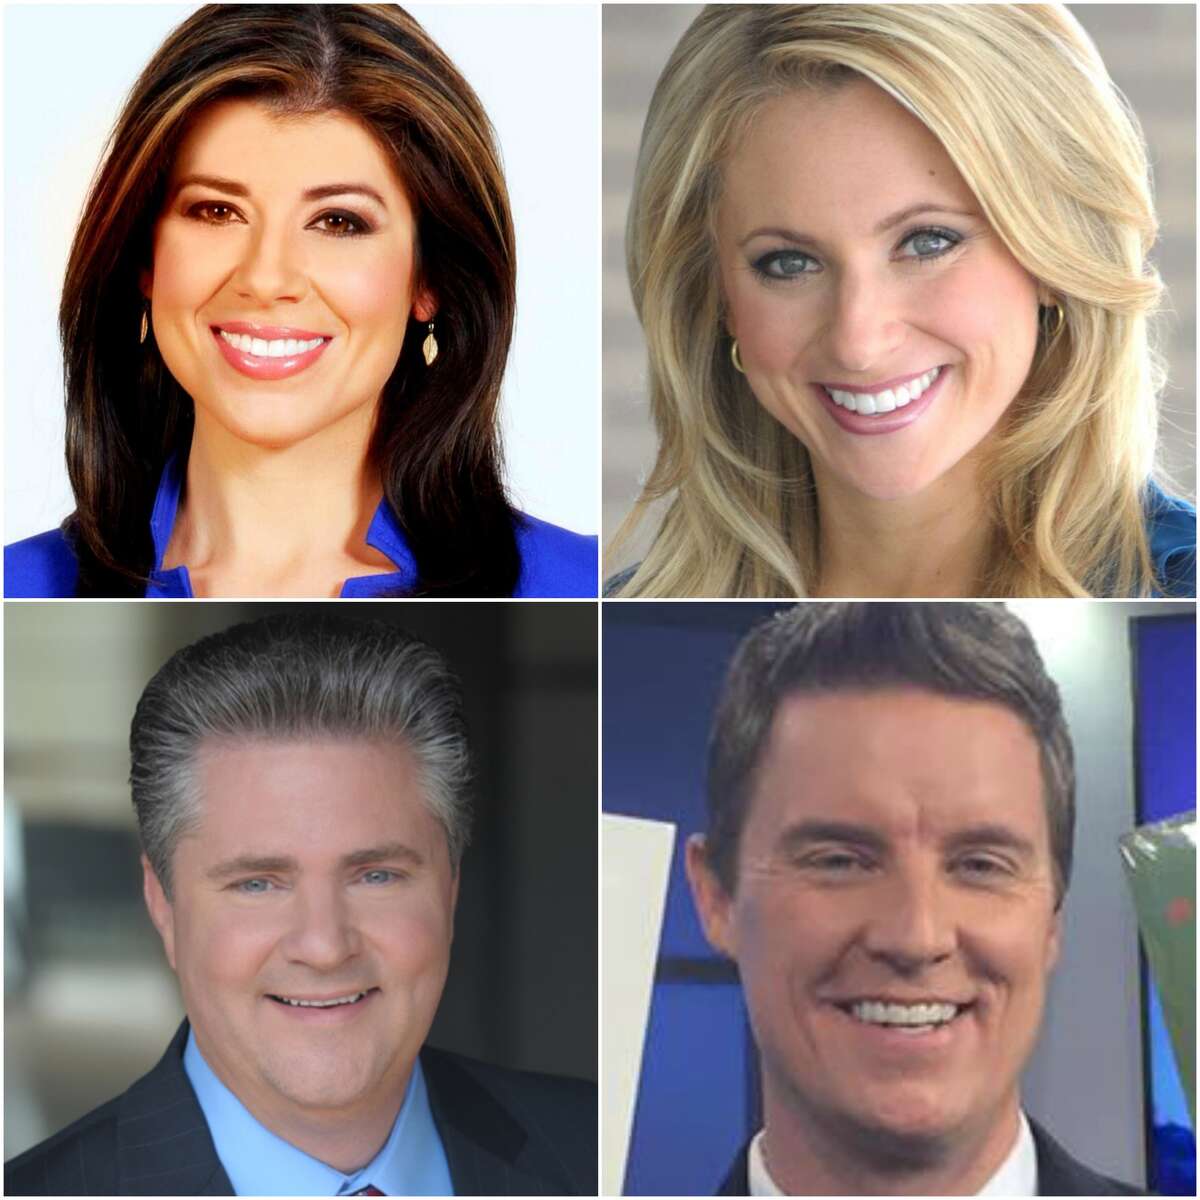 The new morning show team will consist of anchors Russ Lewis and Lisa Hernandez, meteorologist Chita Craft and traffic reporter Darby Douglas. Lewis is KHOU-TV's newest hire and is arriving from KGW-TV in Portland, Ore. He also happens to be the husband of the station's incoming news director Sally Ramirez. Hernandez is moving from the evening newscasts.